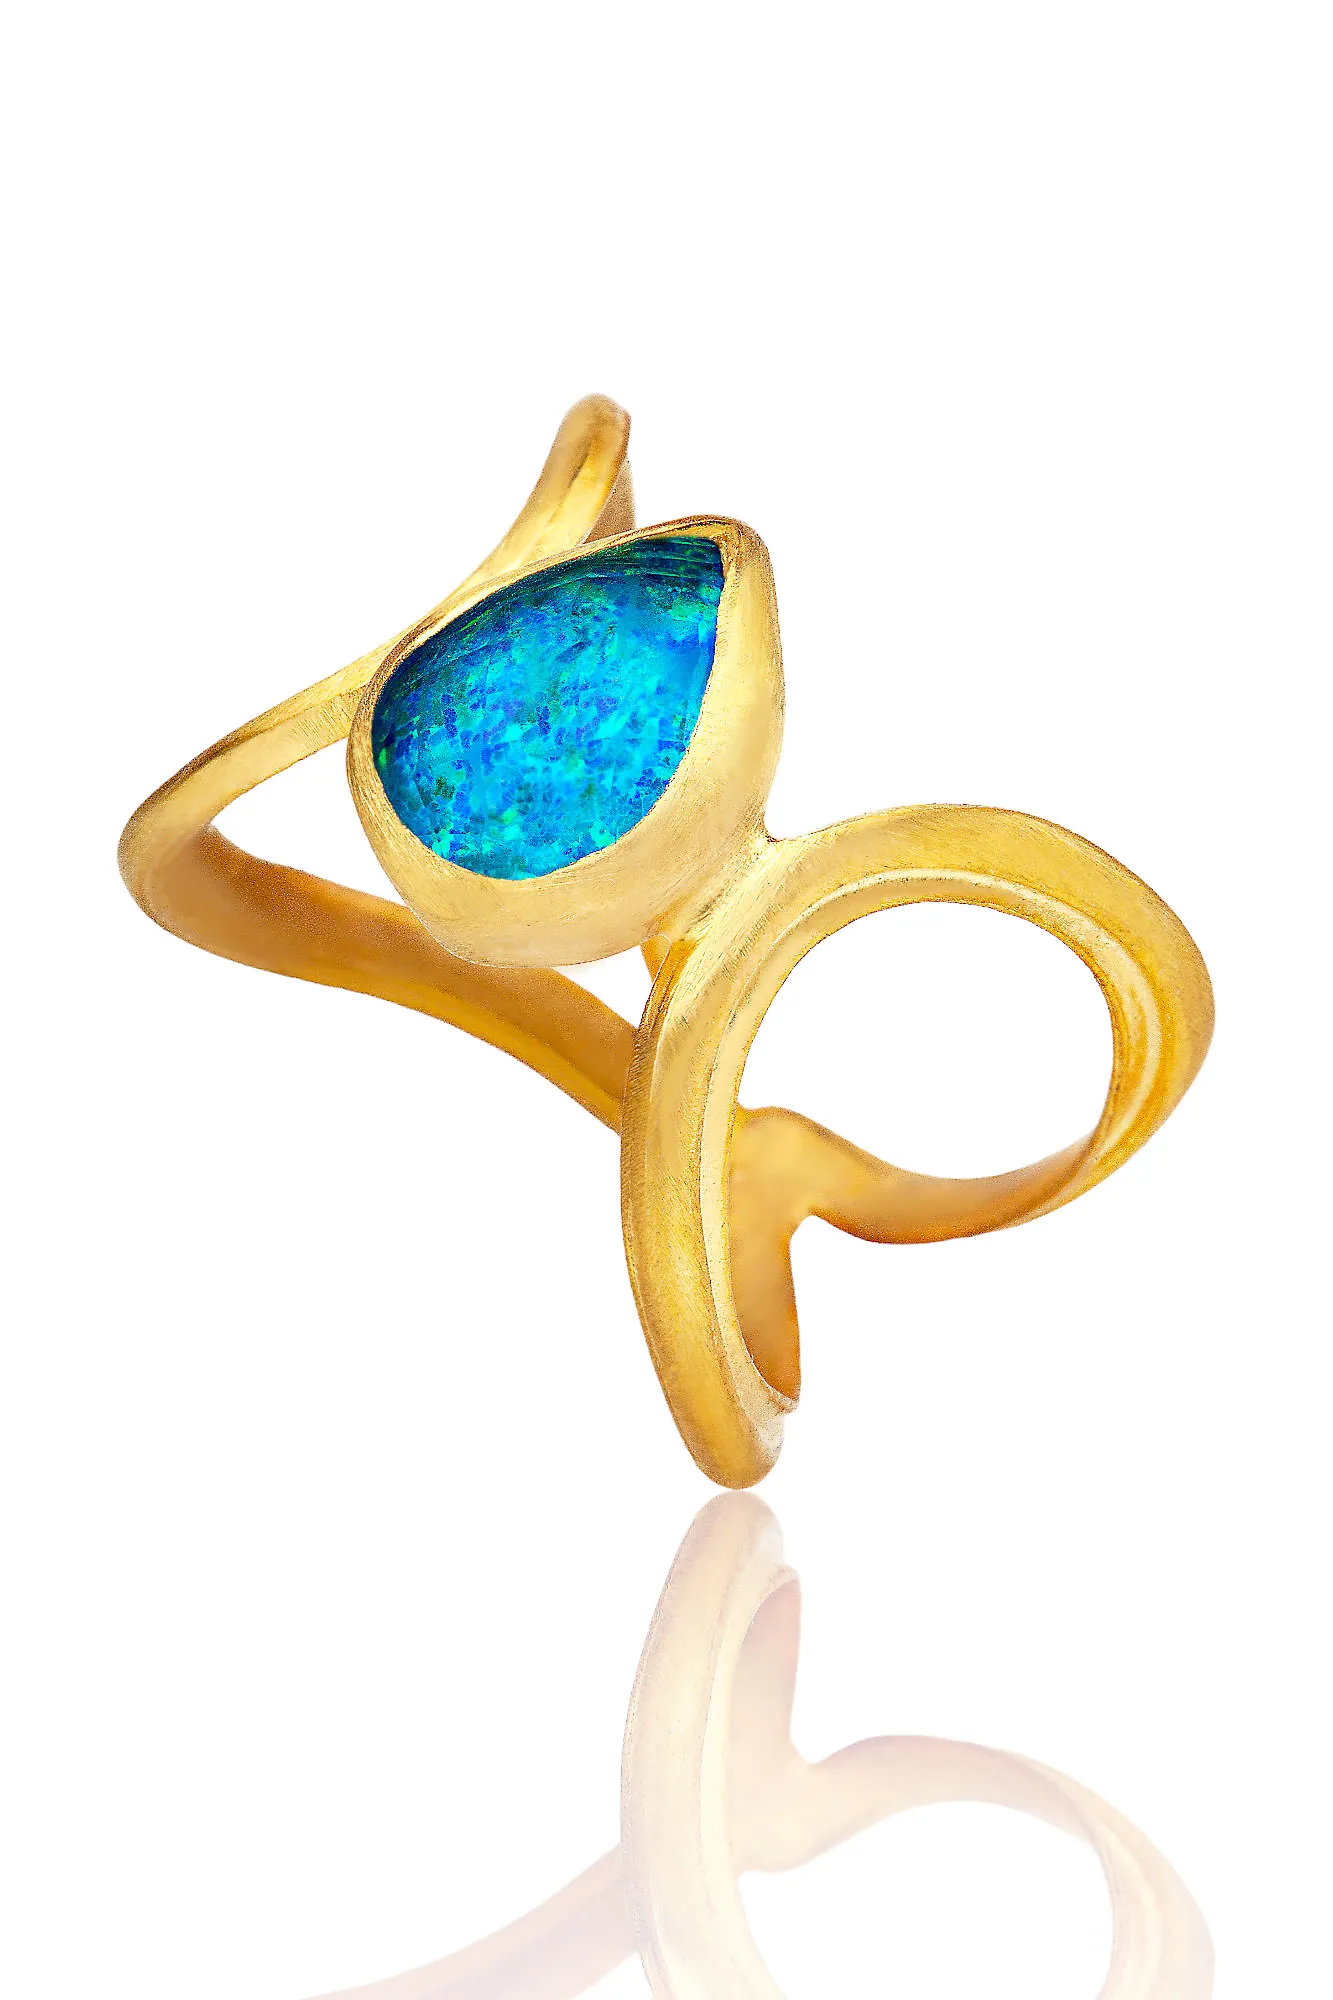 Paisley handmade gold plated silver ring with blue opal